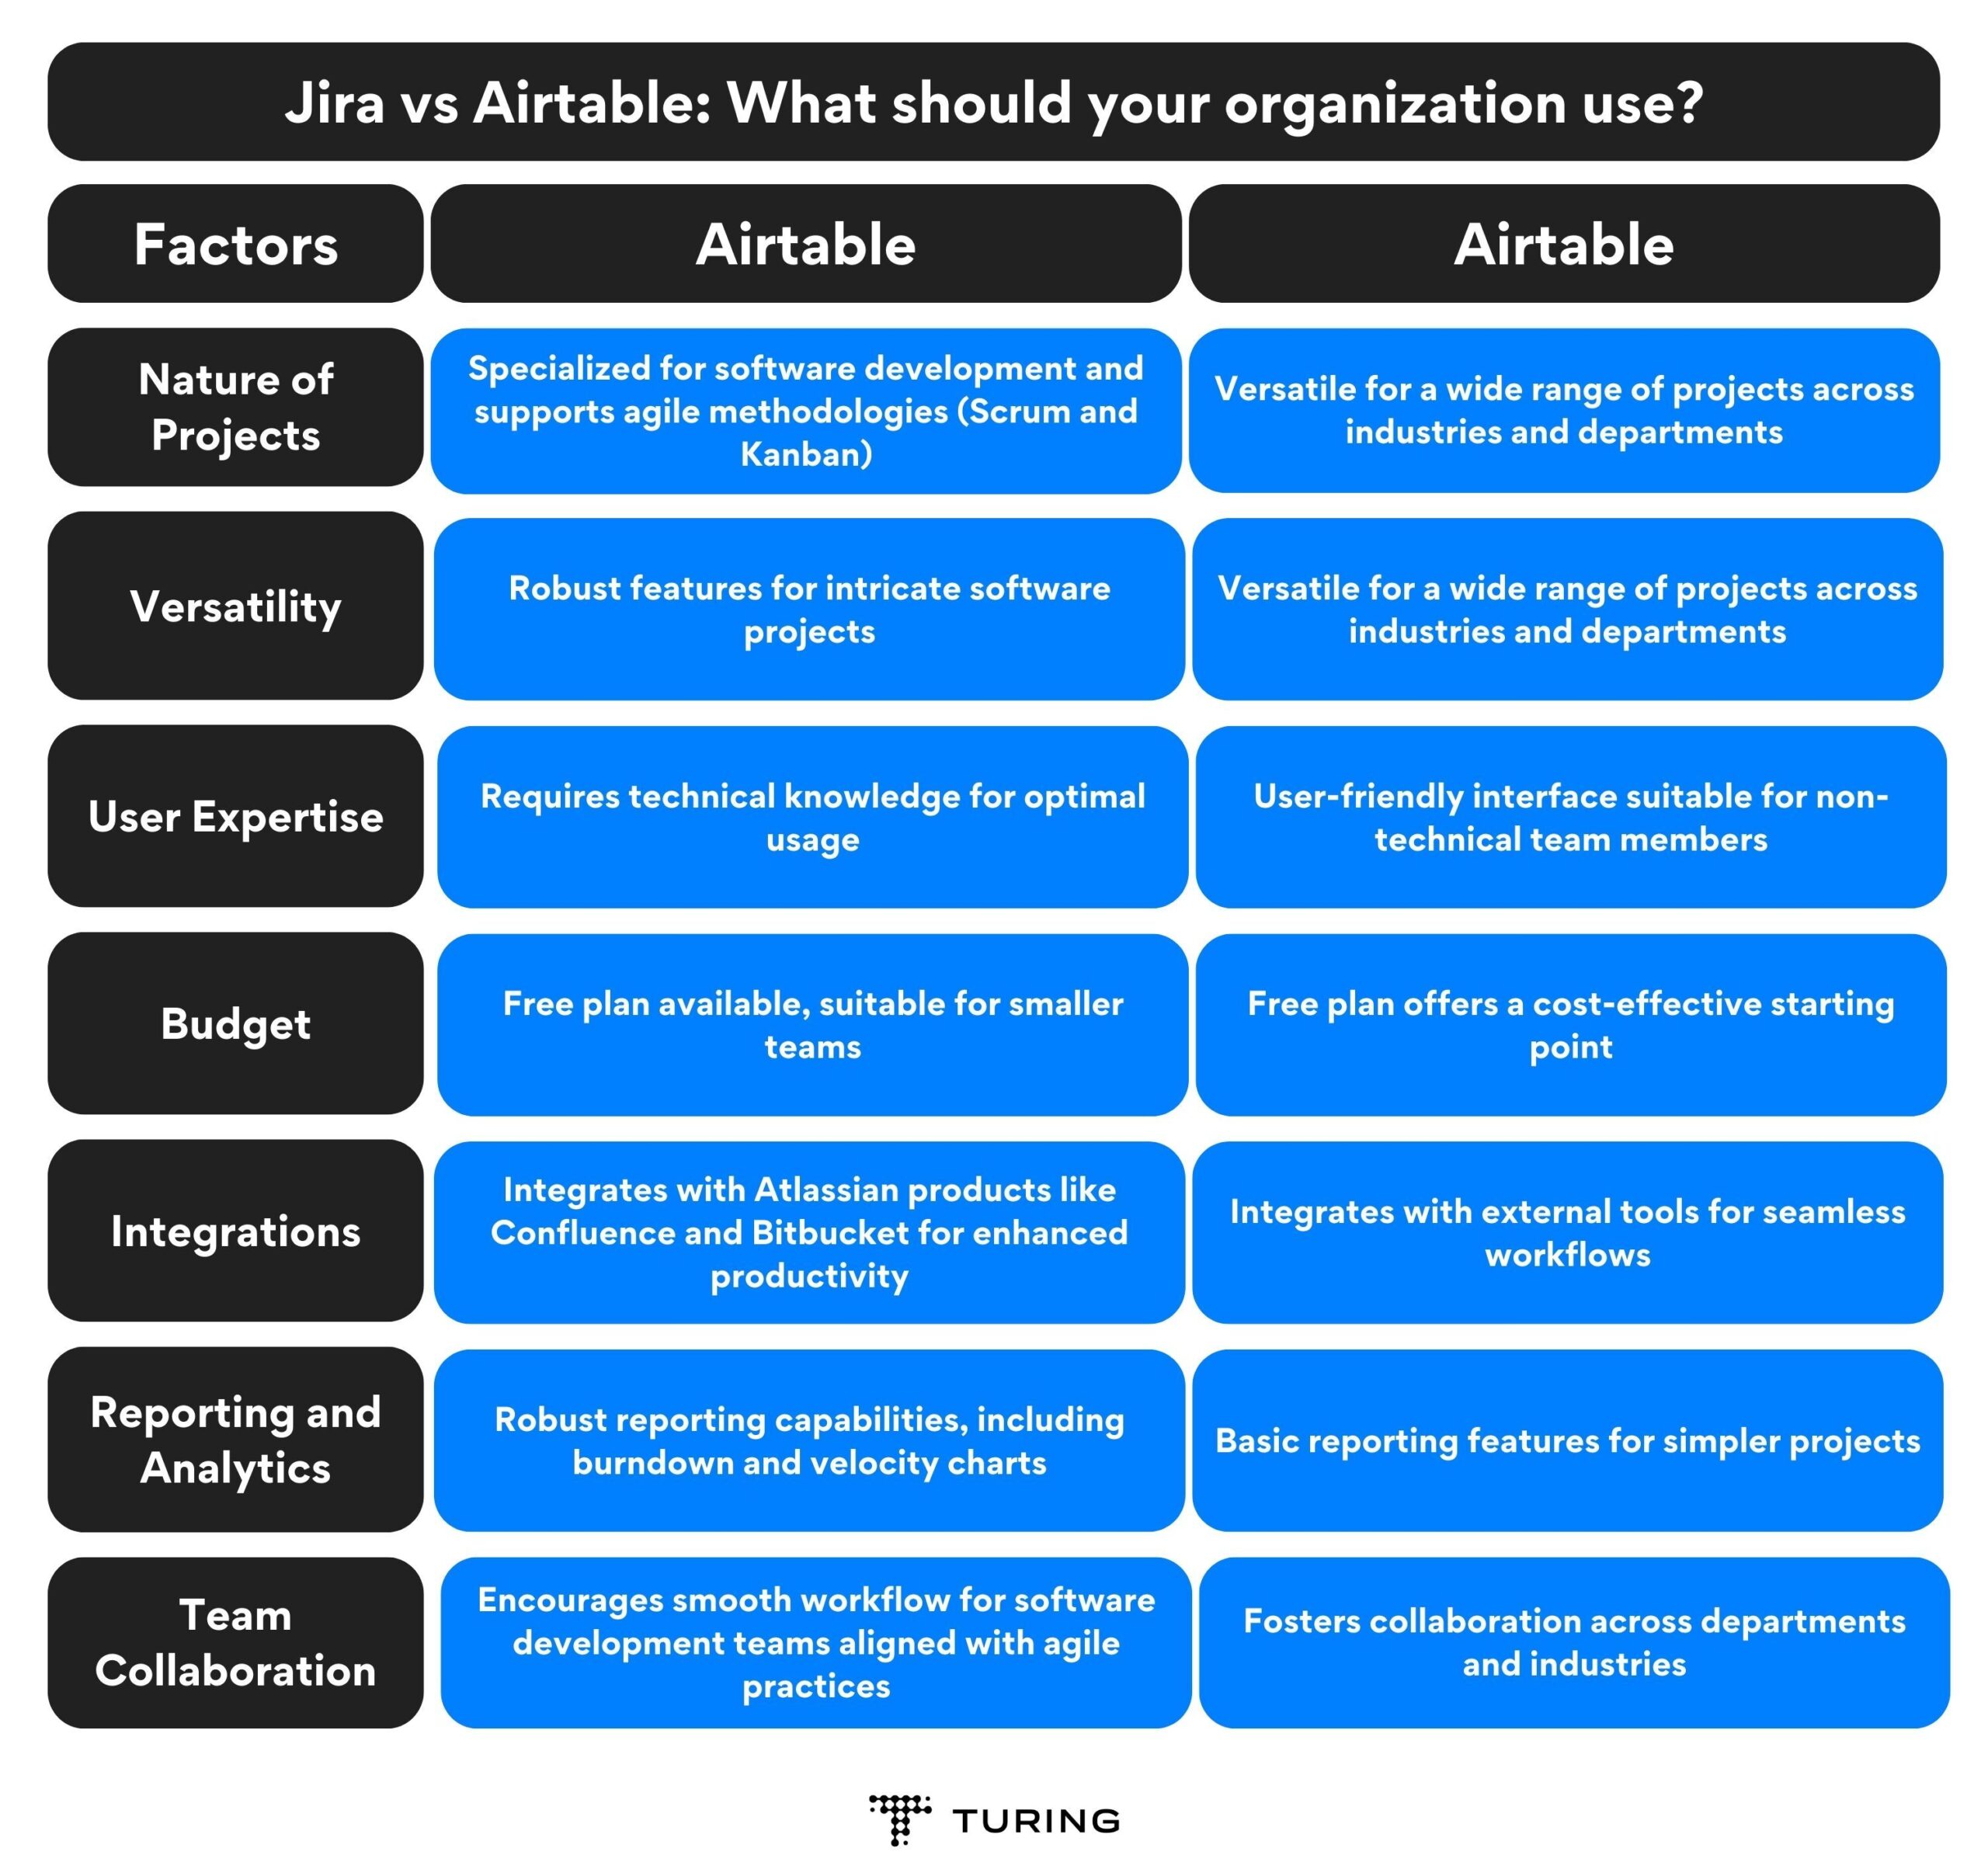 Jira vs Airtable: What should your organization use